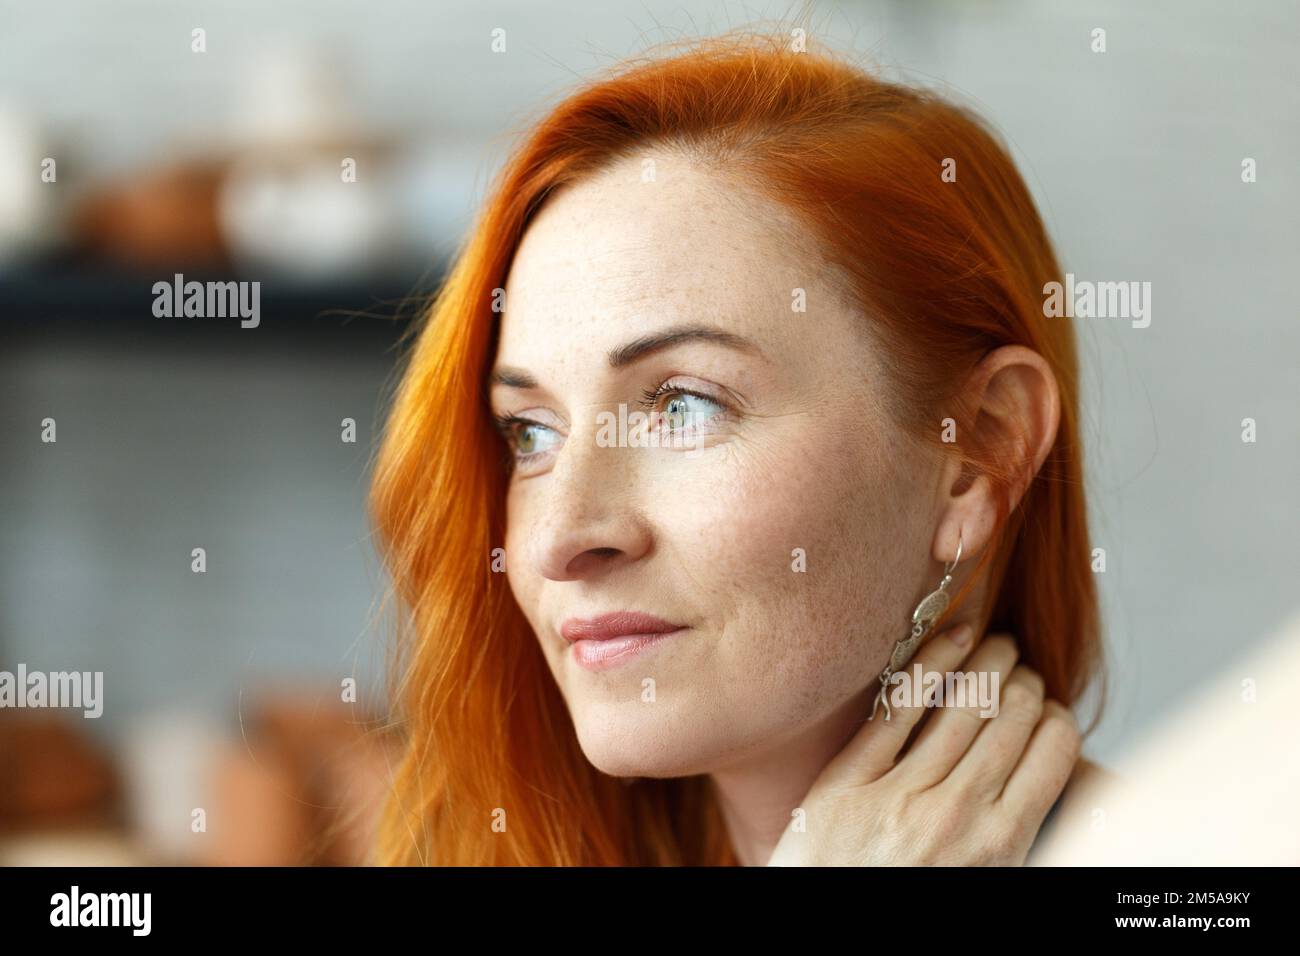 Portrait of smiling middle age woman with red hair. Stock Photo